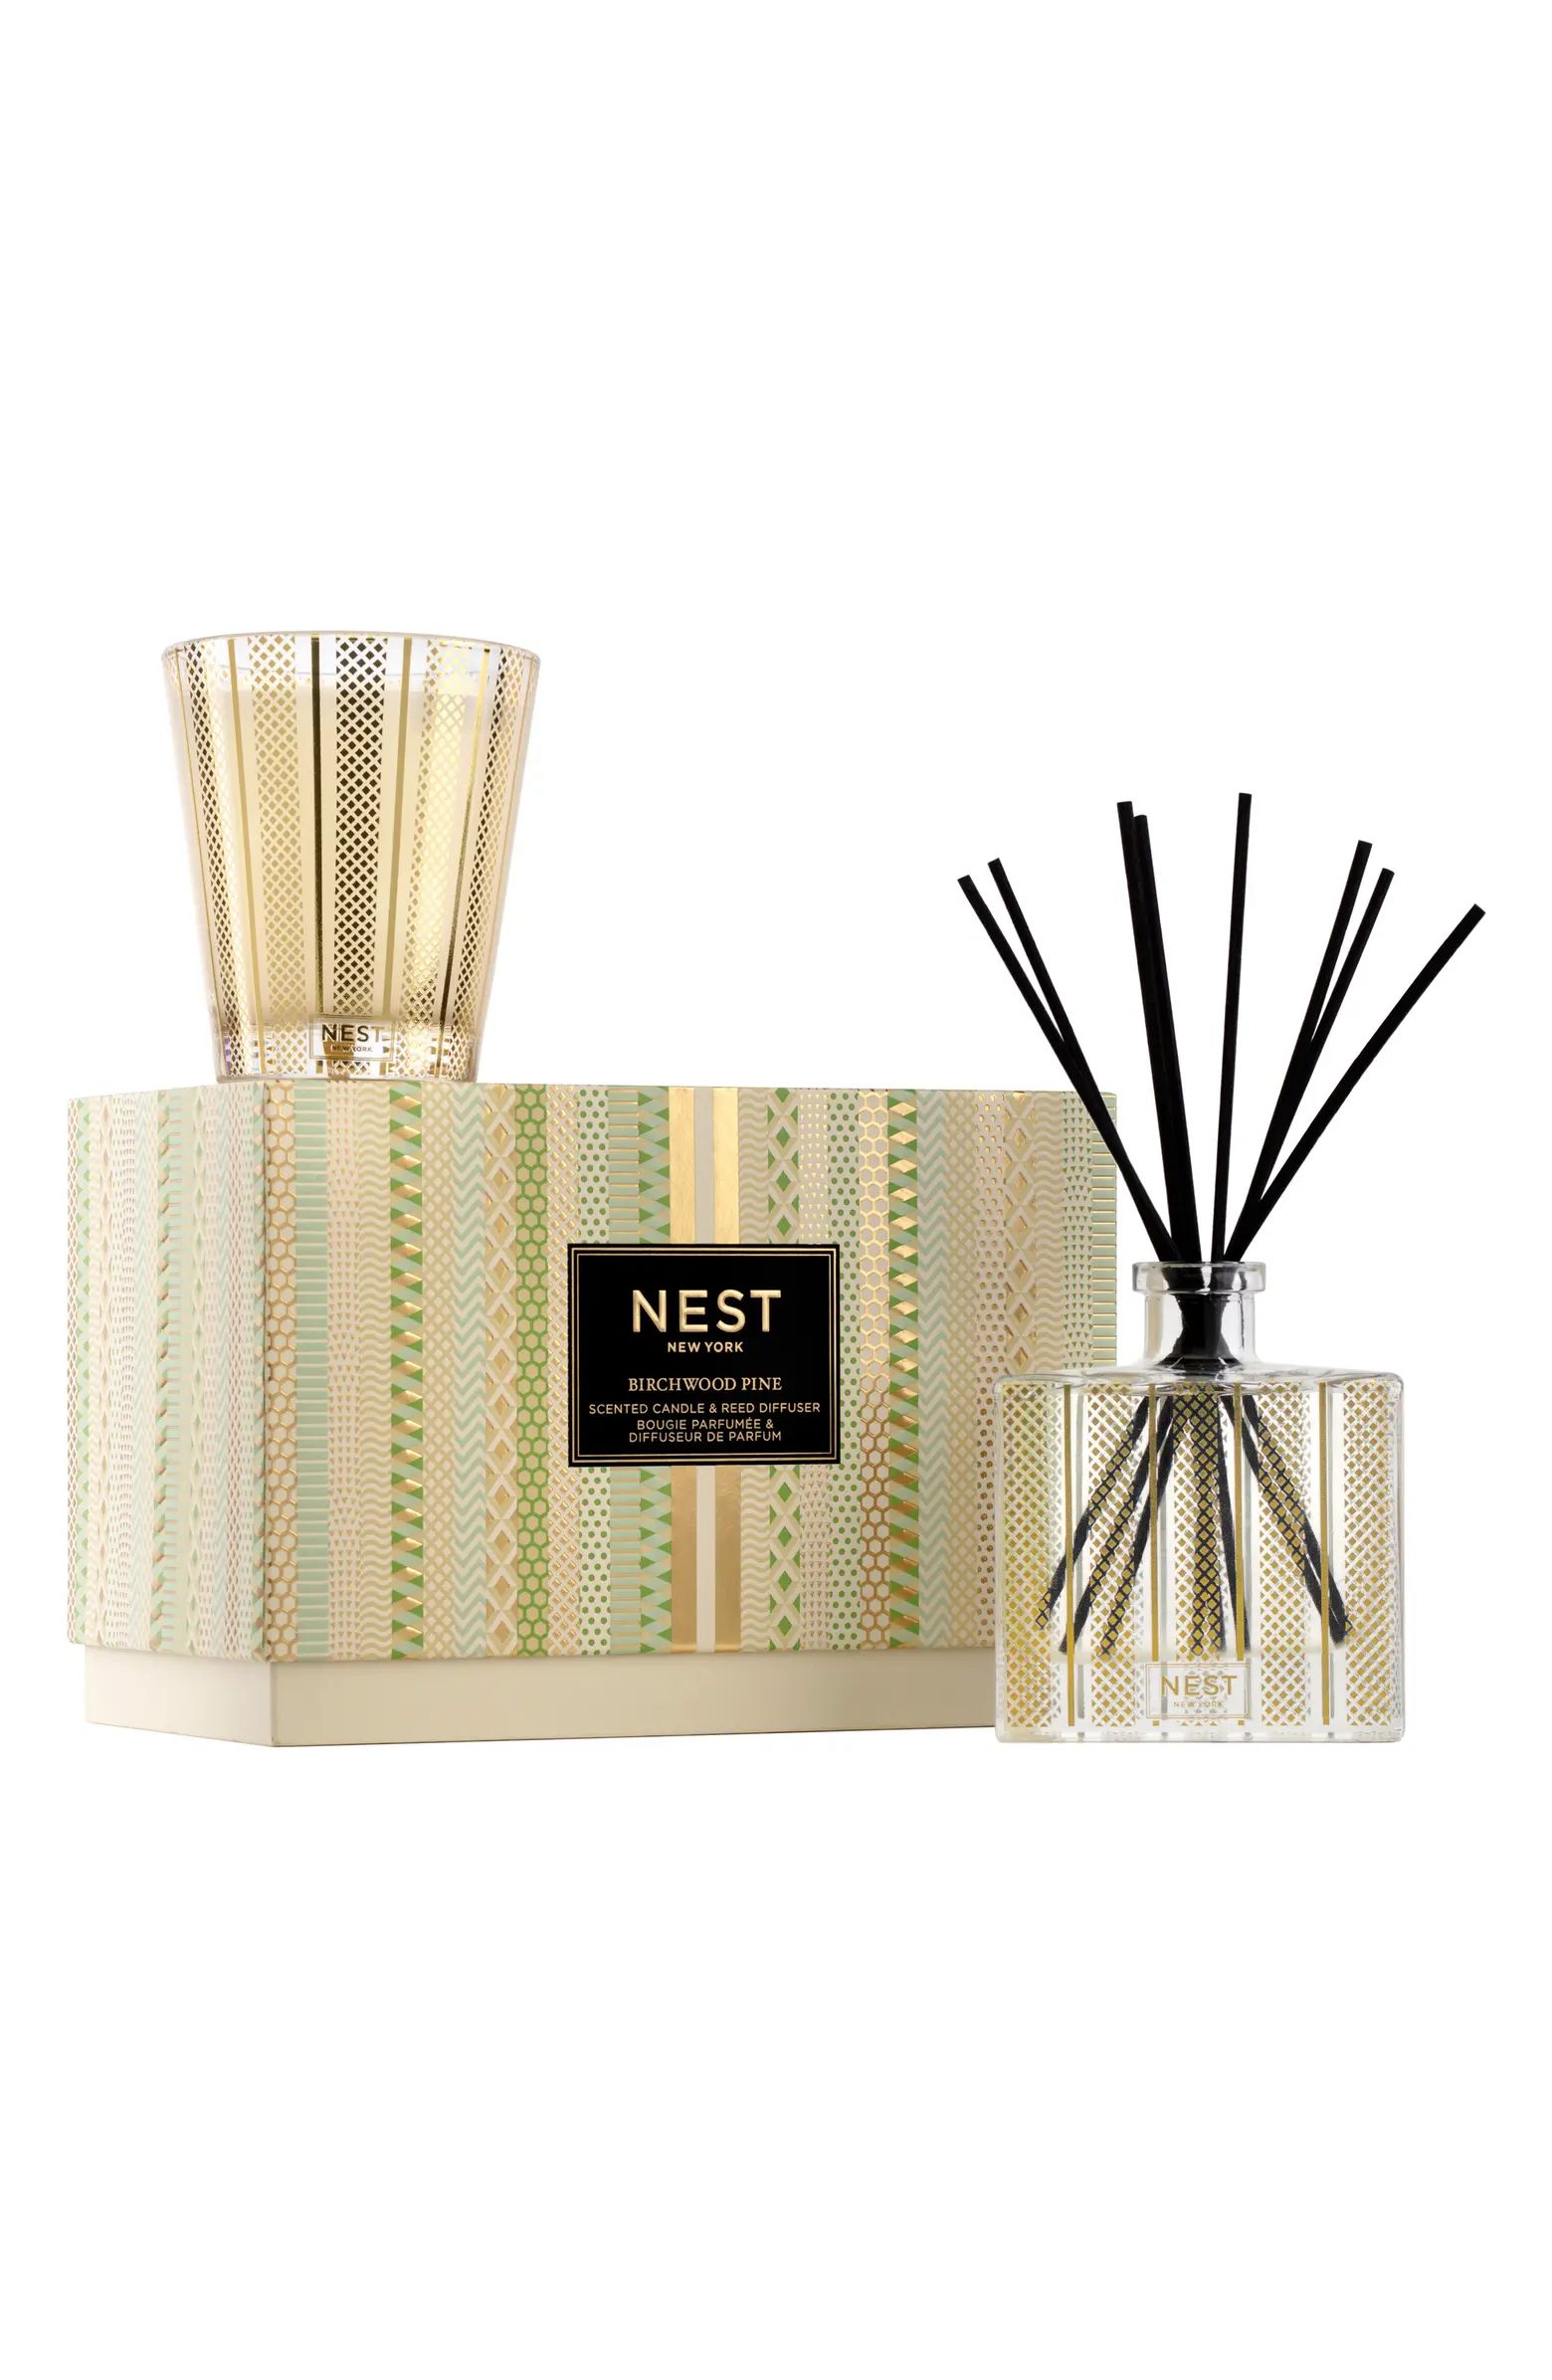 Birchwood Pine Scented Candle & Reed Diffuser Set | Nordstrom